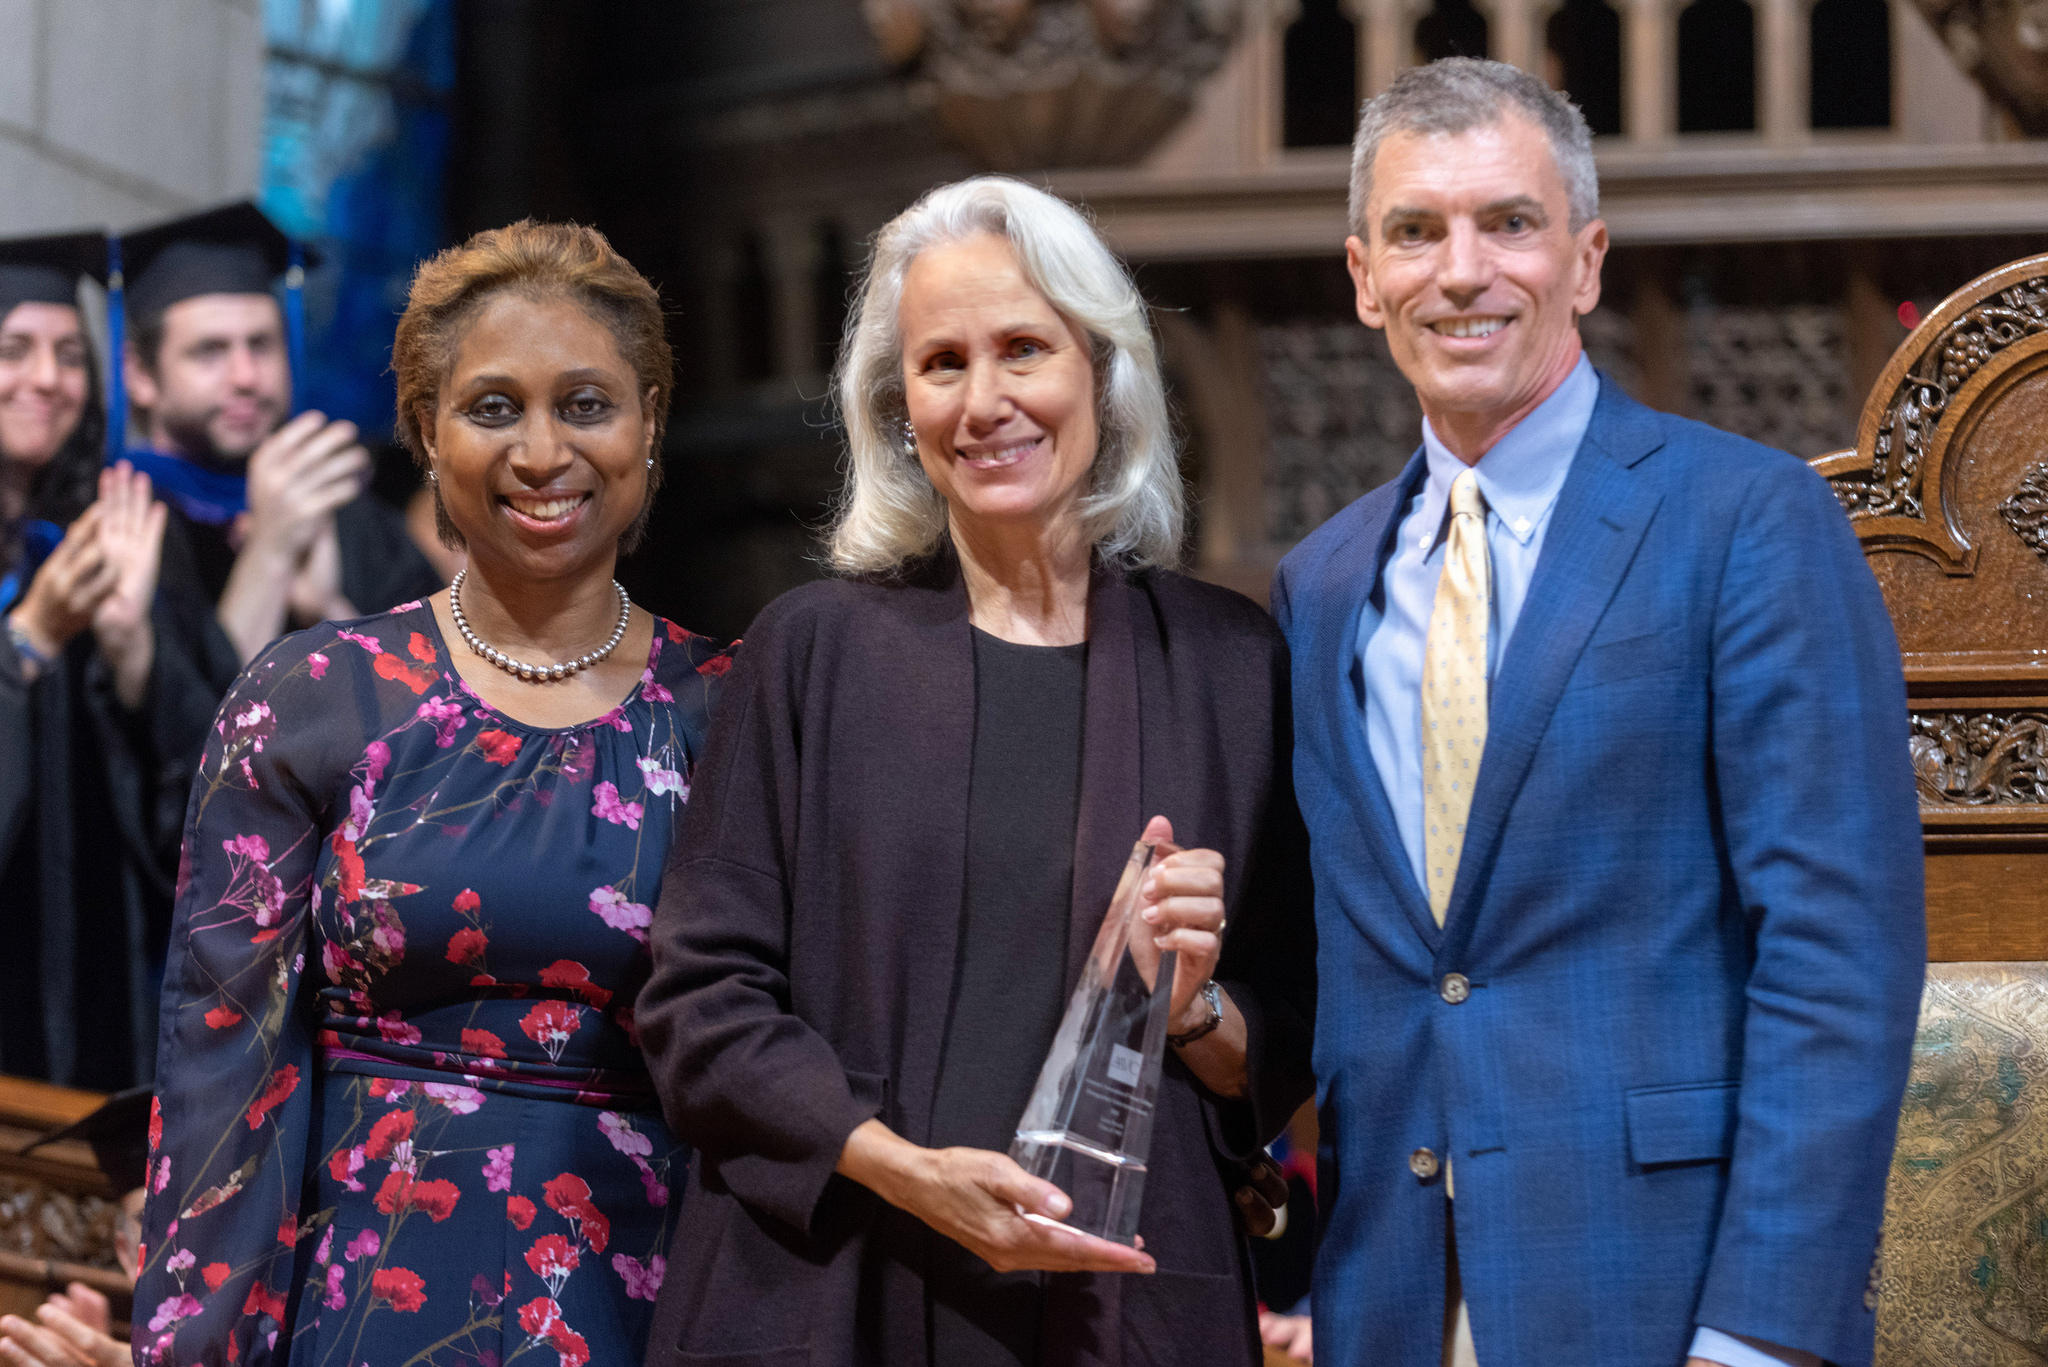 Three people stand in the chapel, smiling at the camera. One person holds a small glass award.